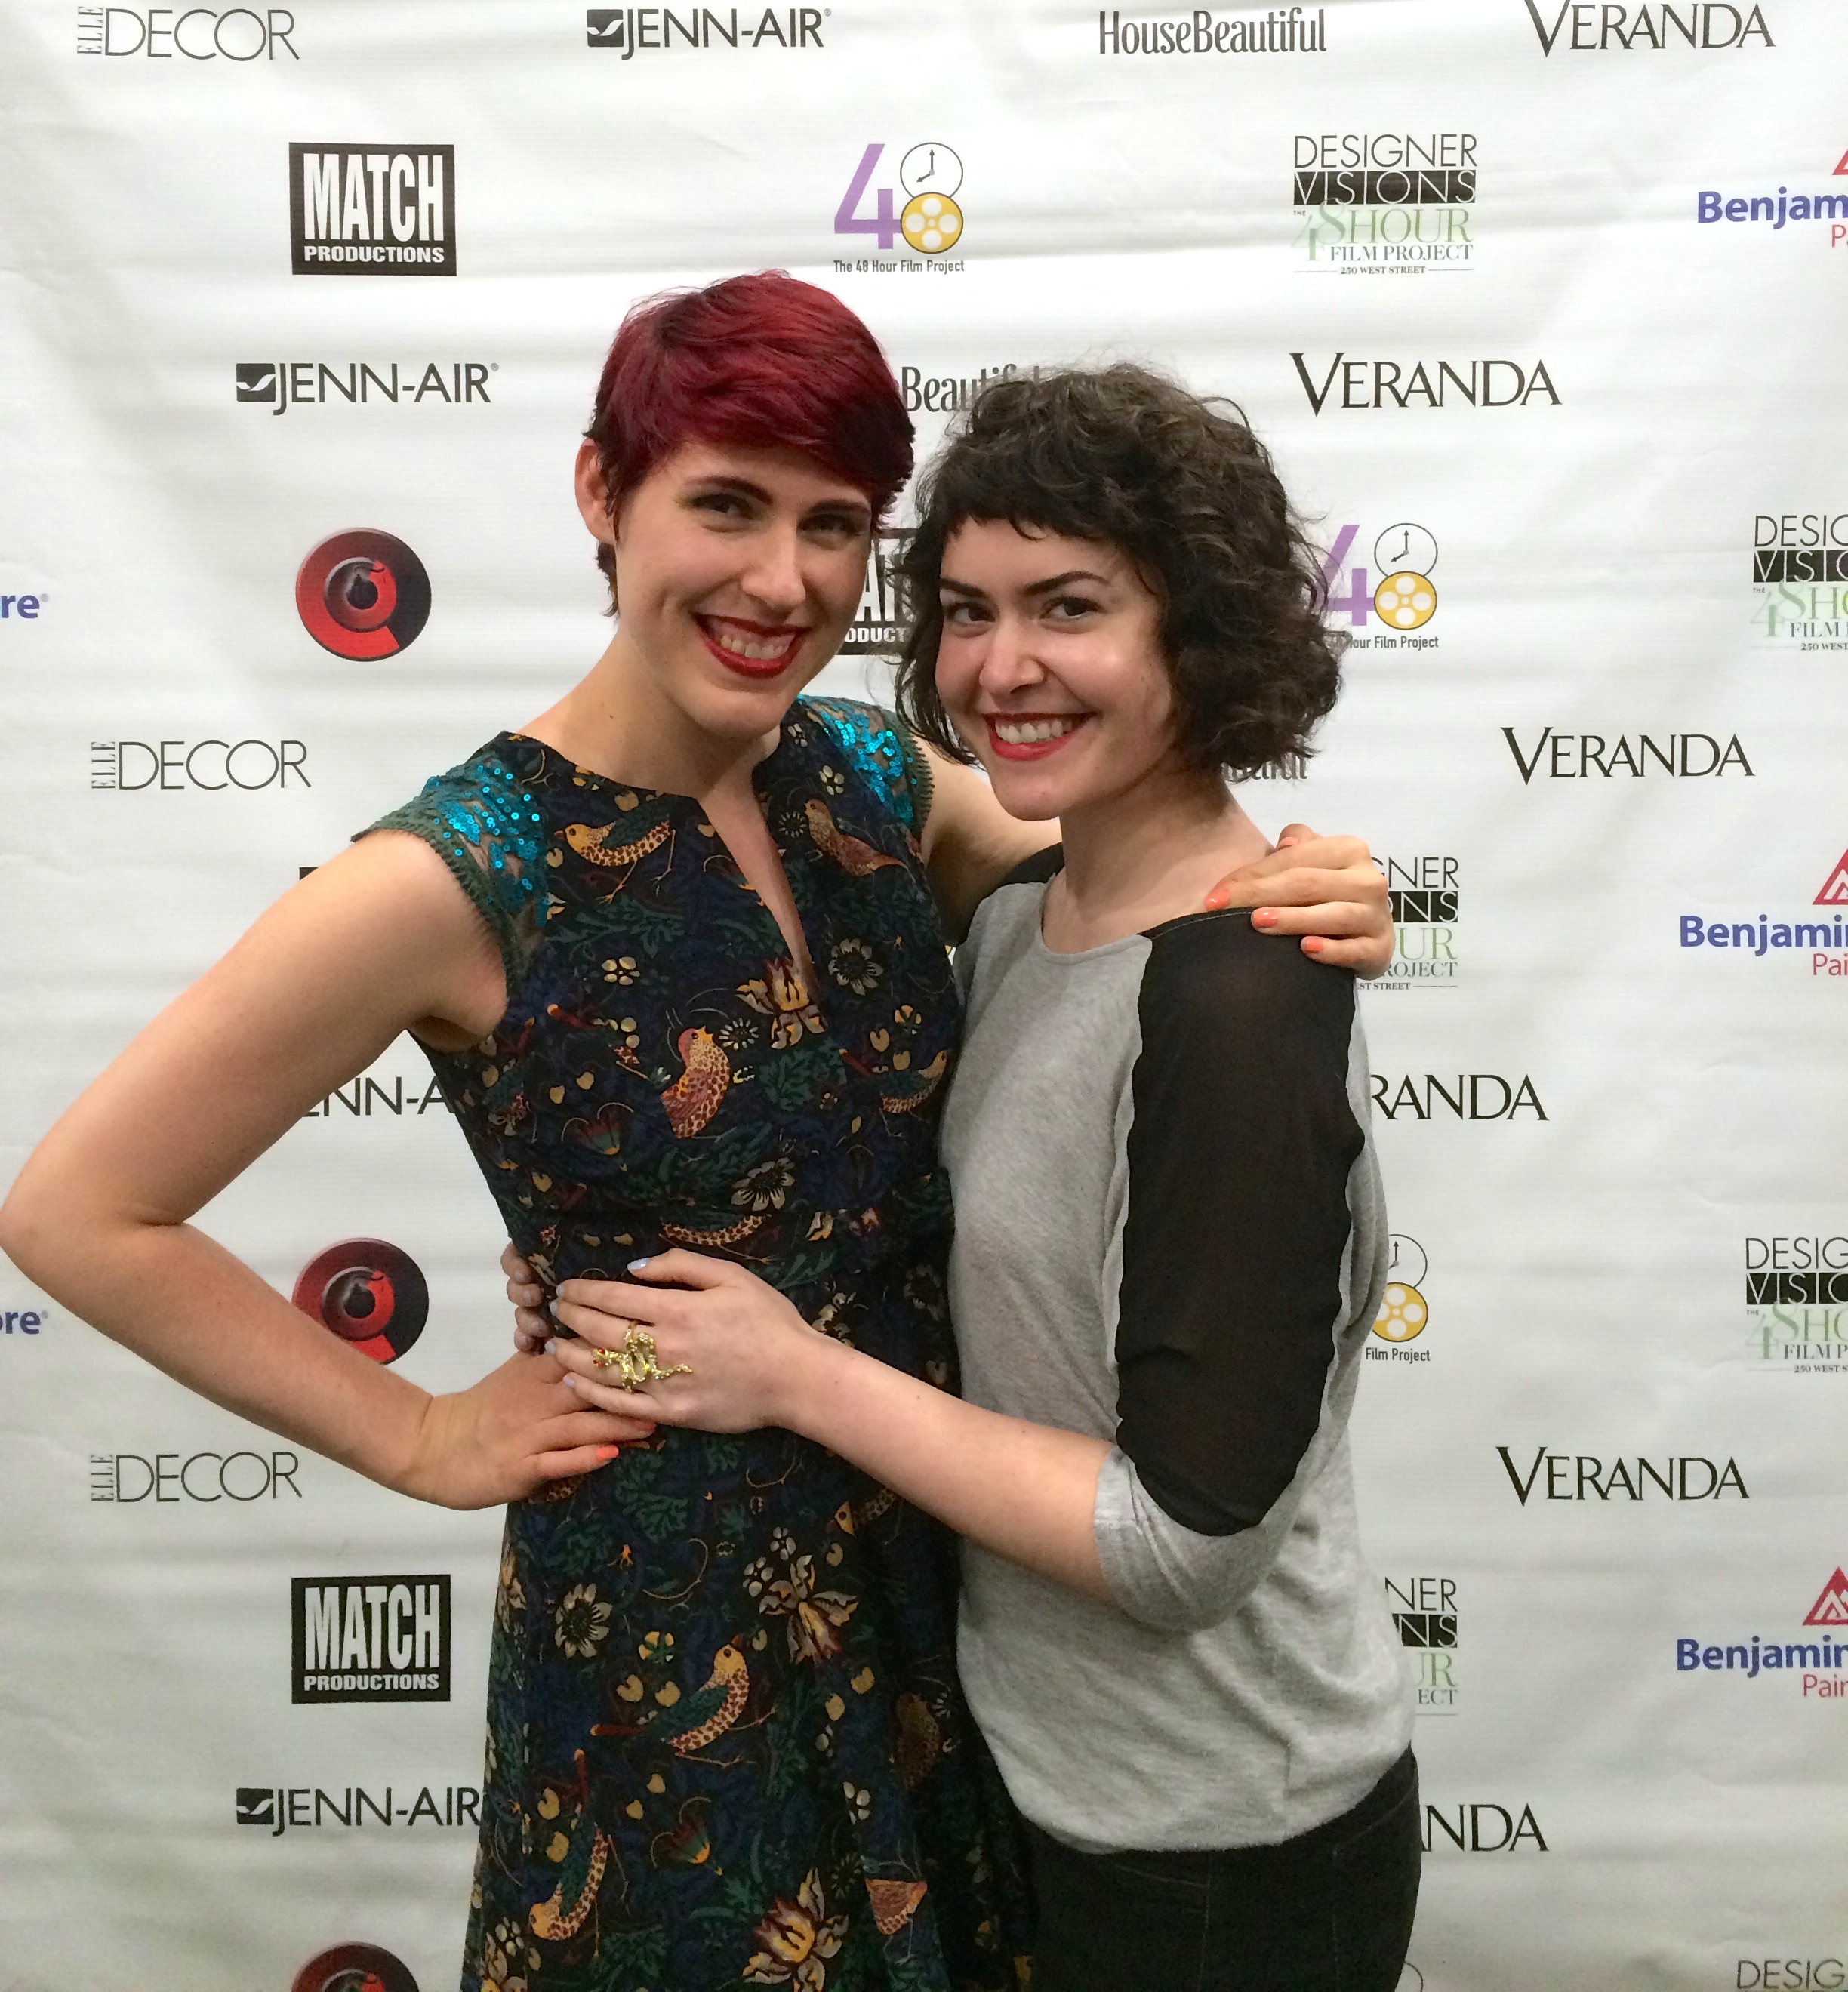 Loralee and actor Caitlin Johnston at the 48 Hour Film Project in NYC.